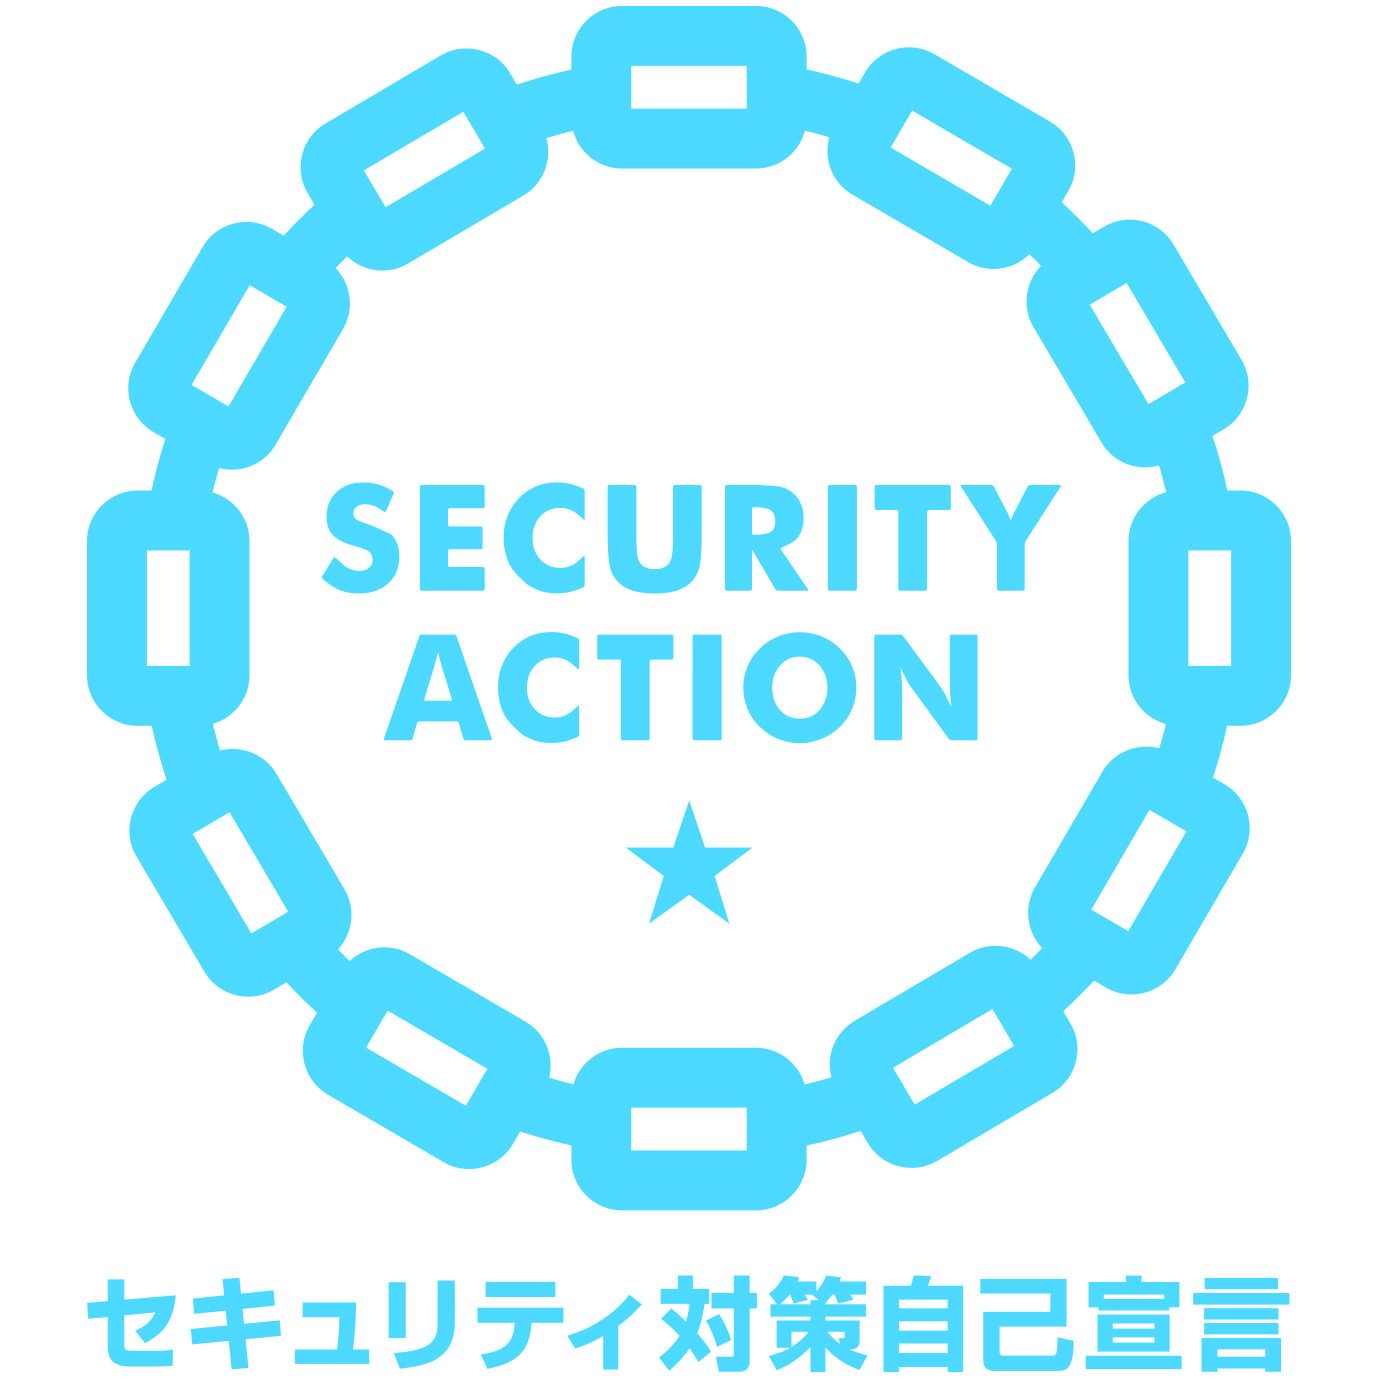 security_action_hitotsuboshi-large_color.jpg